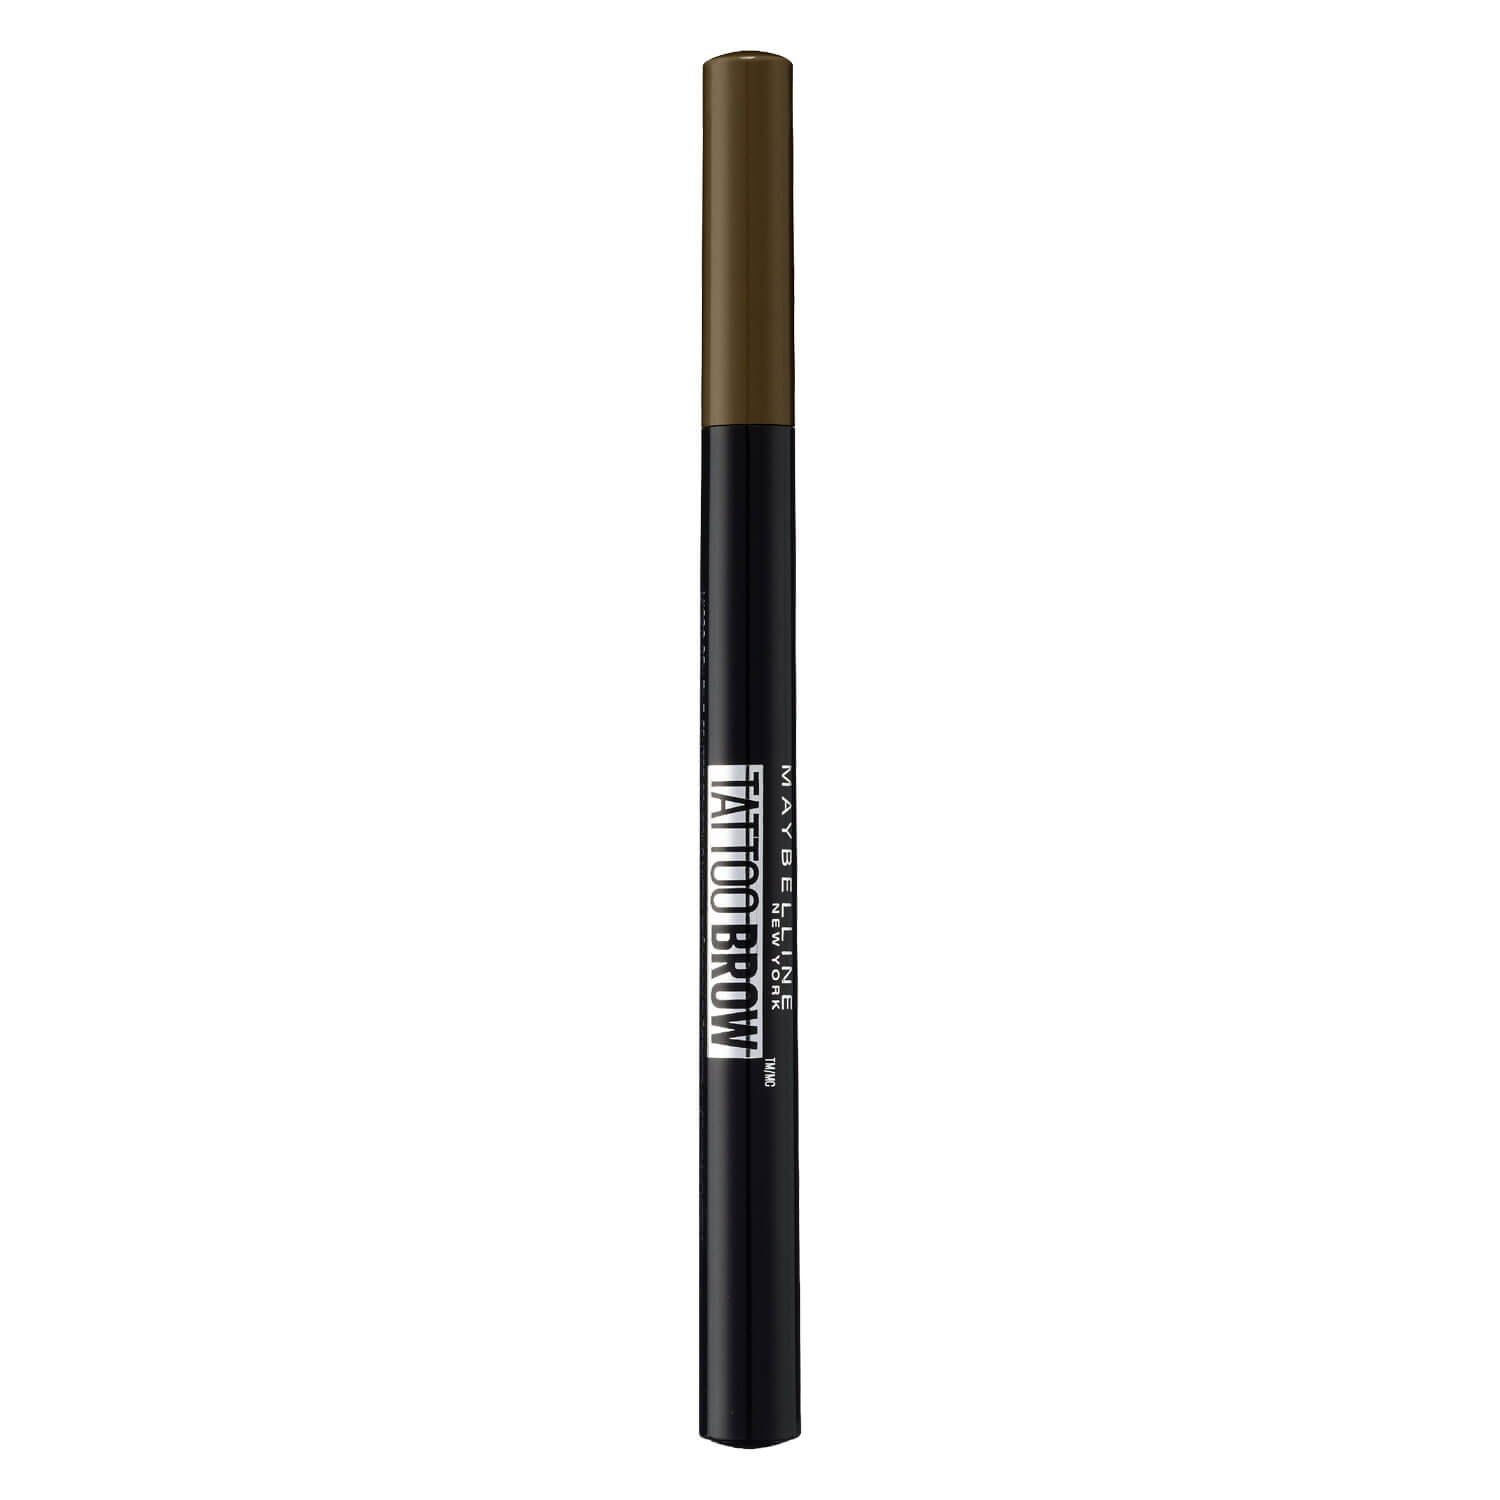 Maybelline NY Brows - Brown Brow Nr. Tattoo 130 Augenbrauenstift Deep